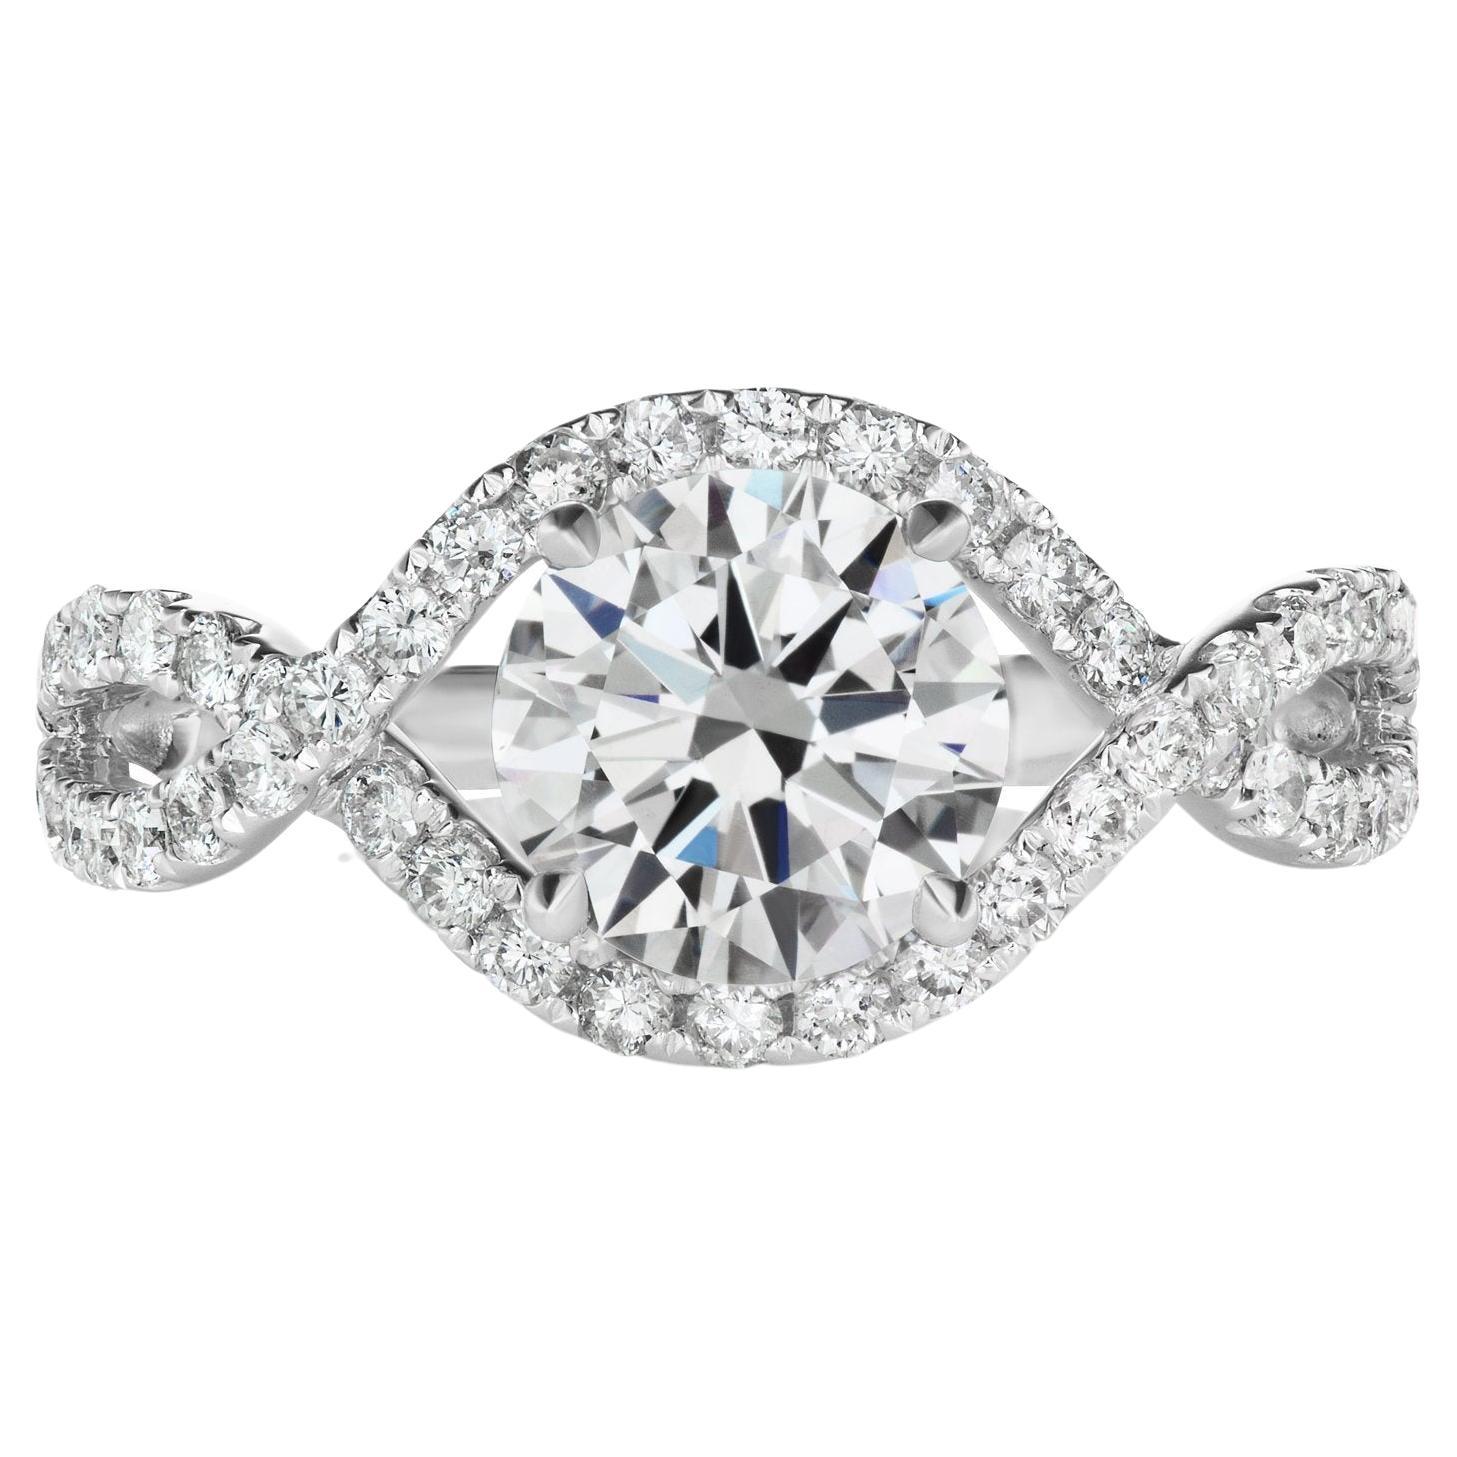 2 Carat Round Cut Diamond Engagement Ring EGL Certified F VVS For Sale